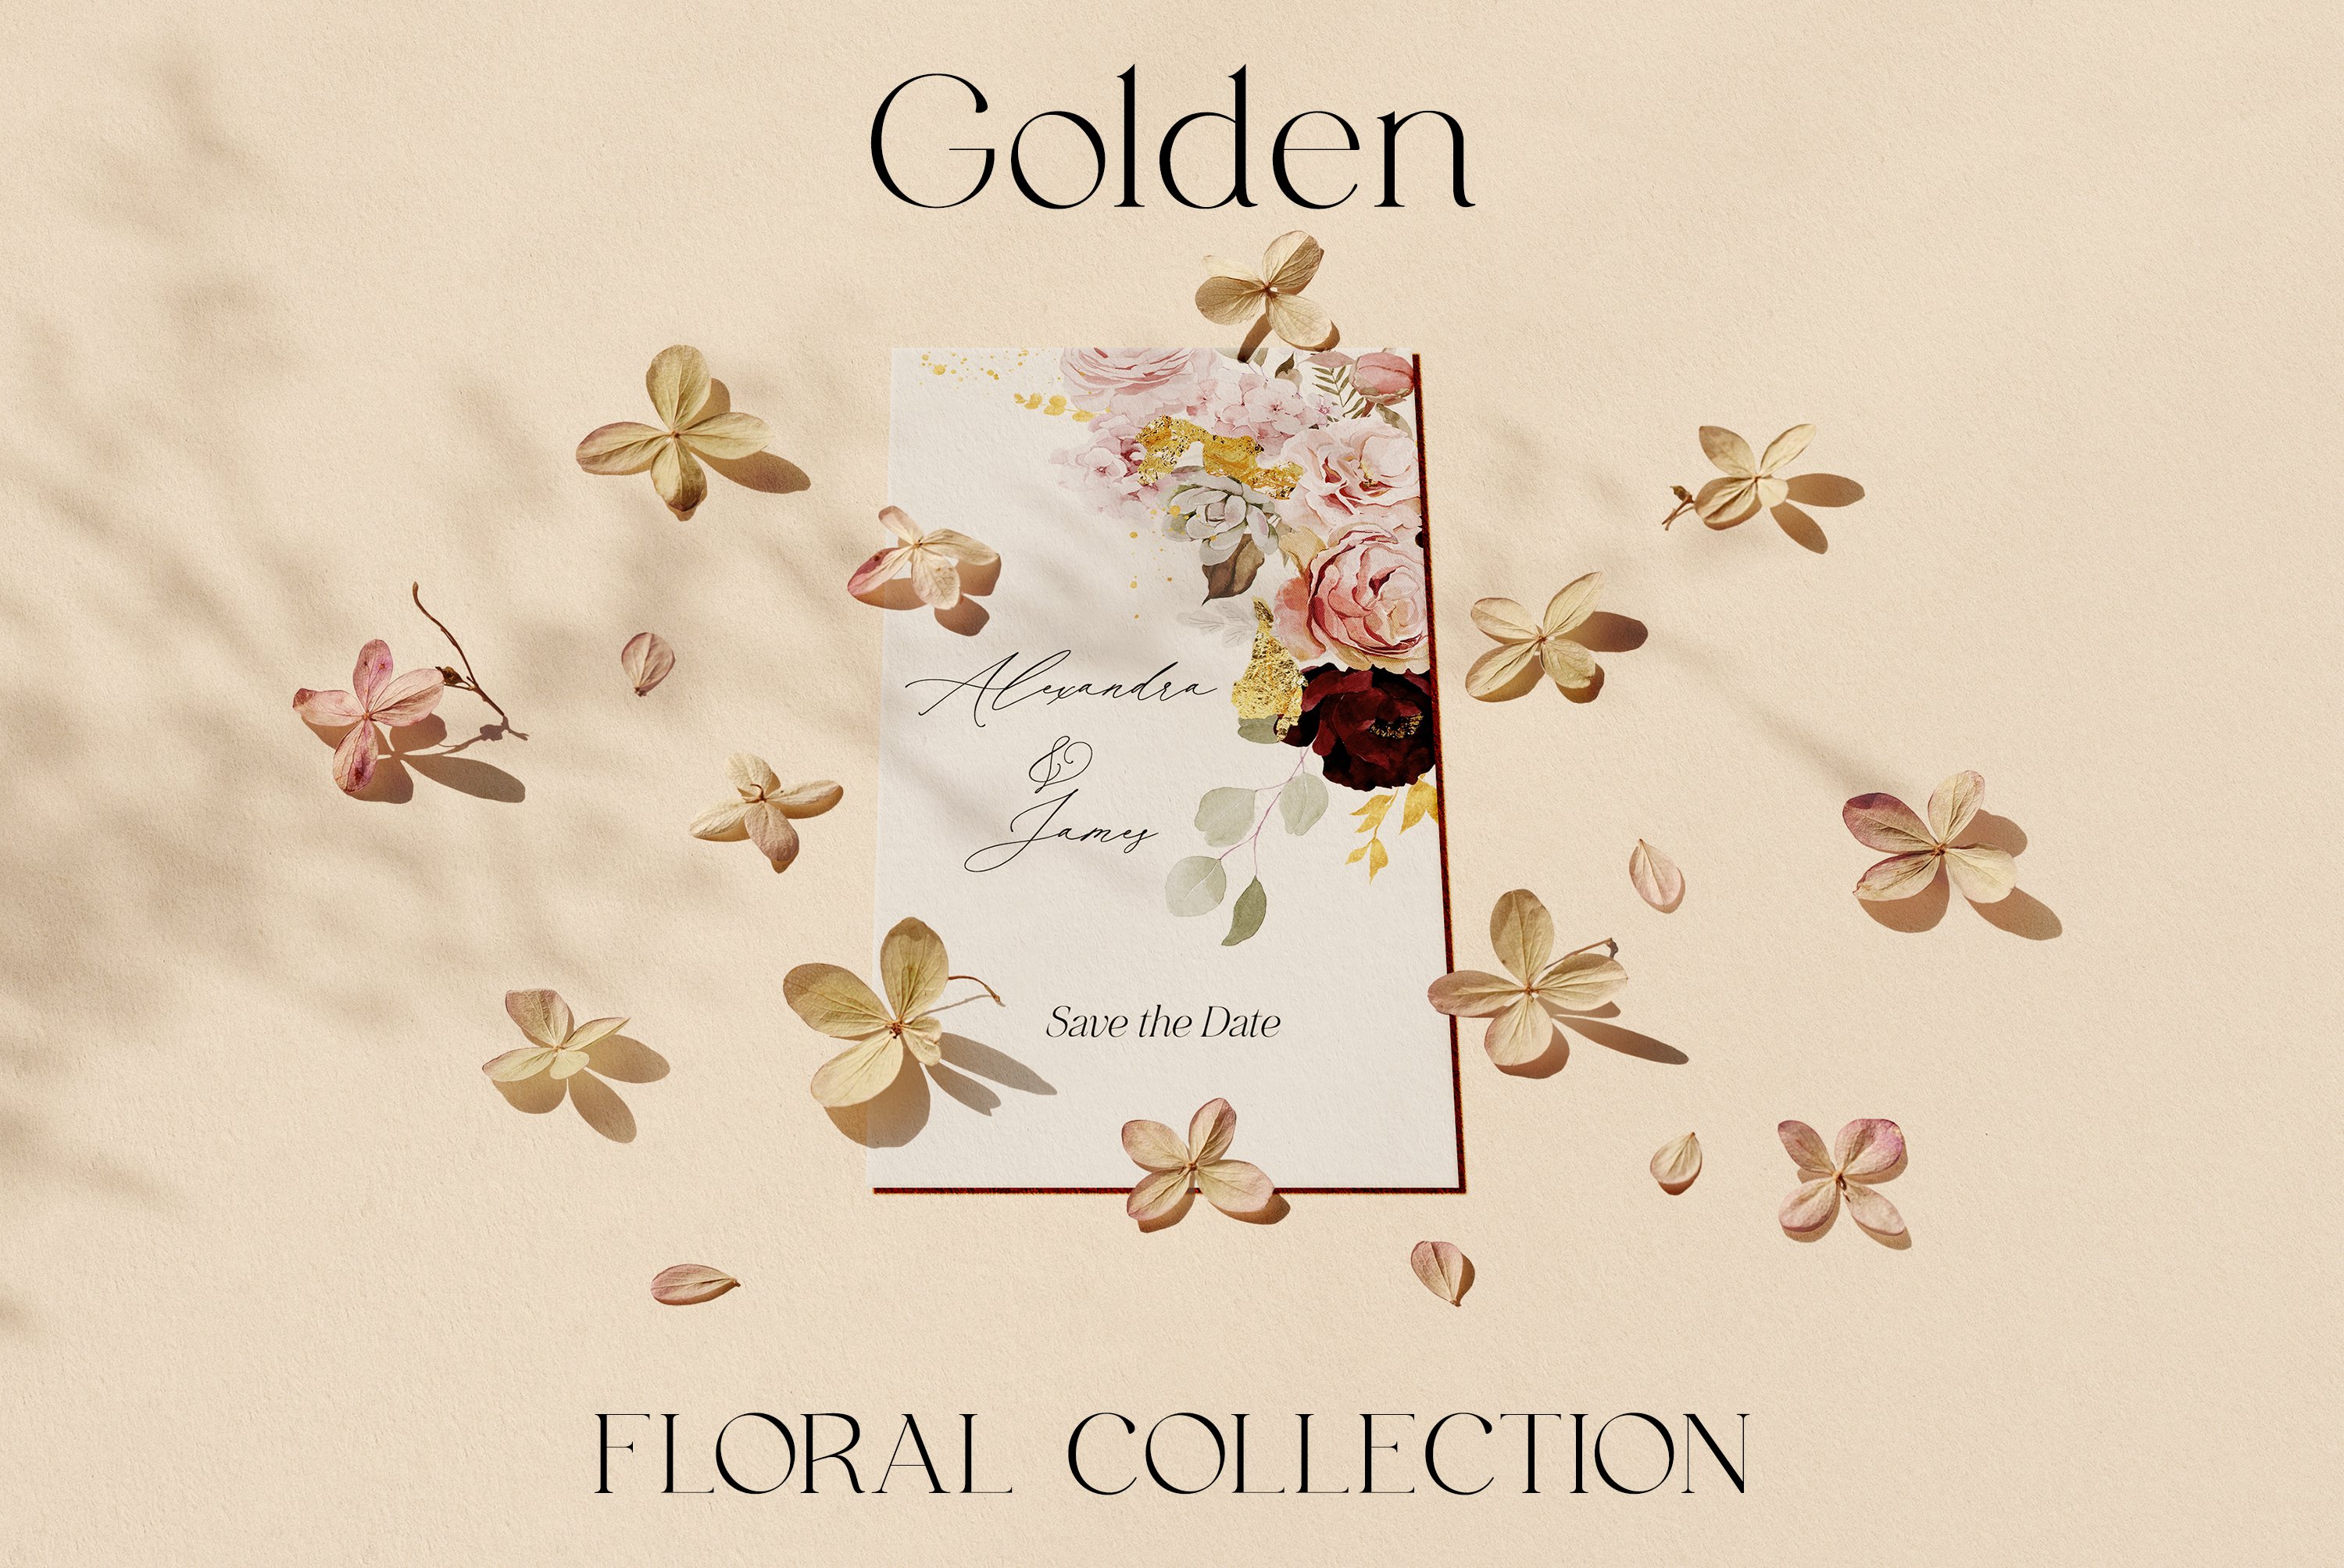 Floral collection in gold.